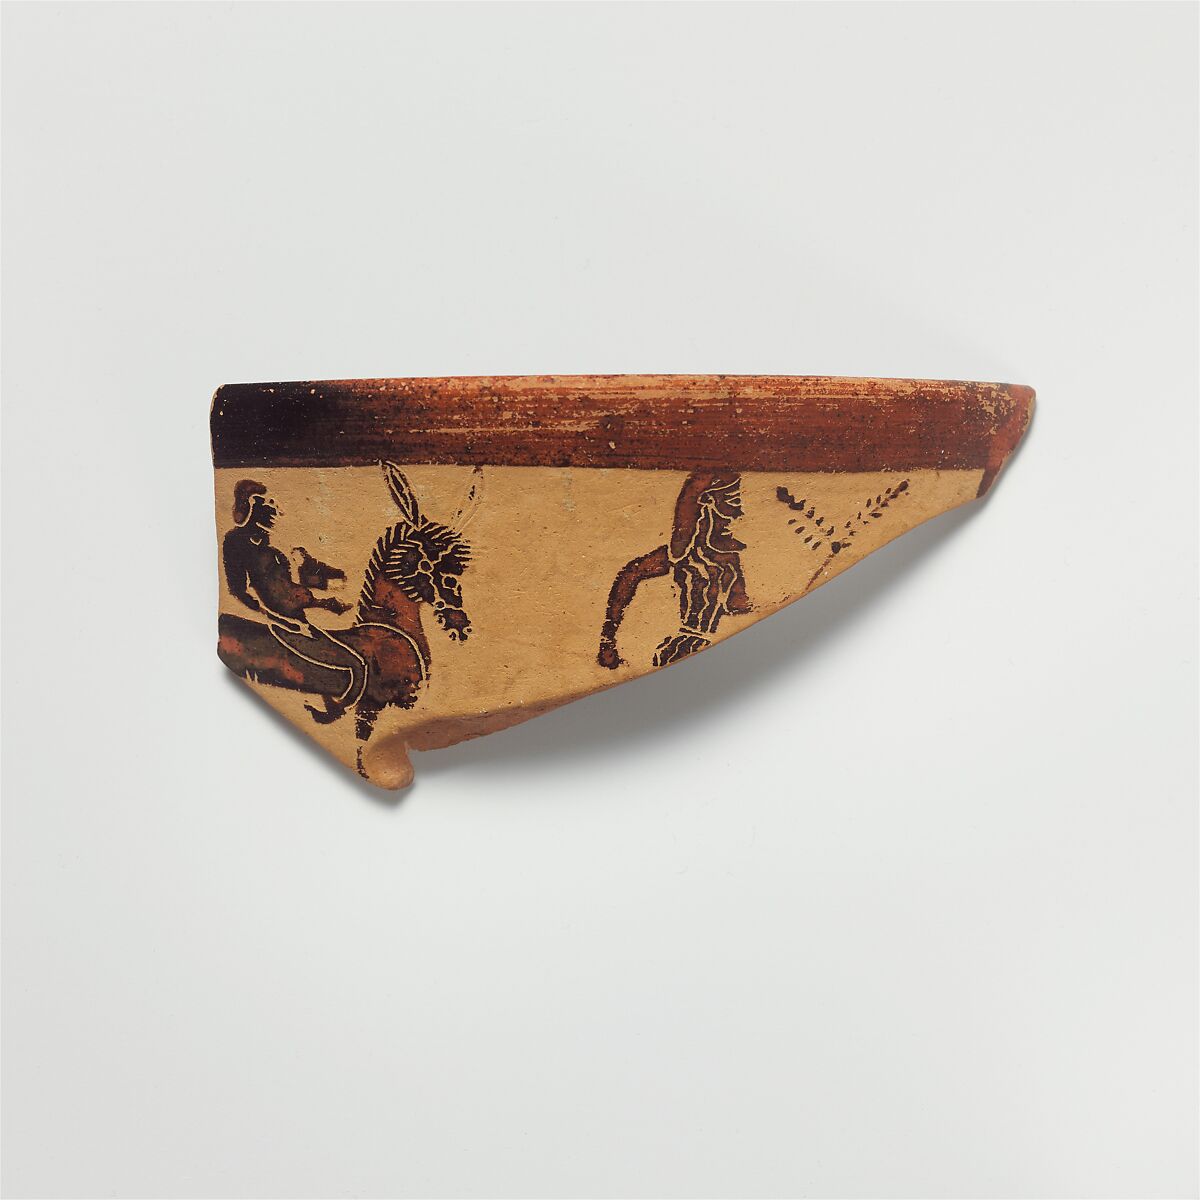 Fragment of a terracotta kantharos (drinking cup with high handles), Terracotta, Greek, Boeotian 